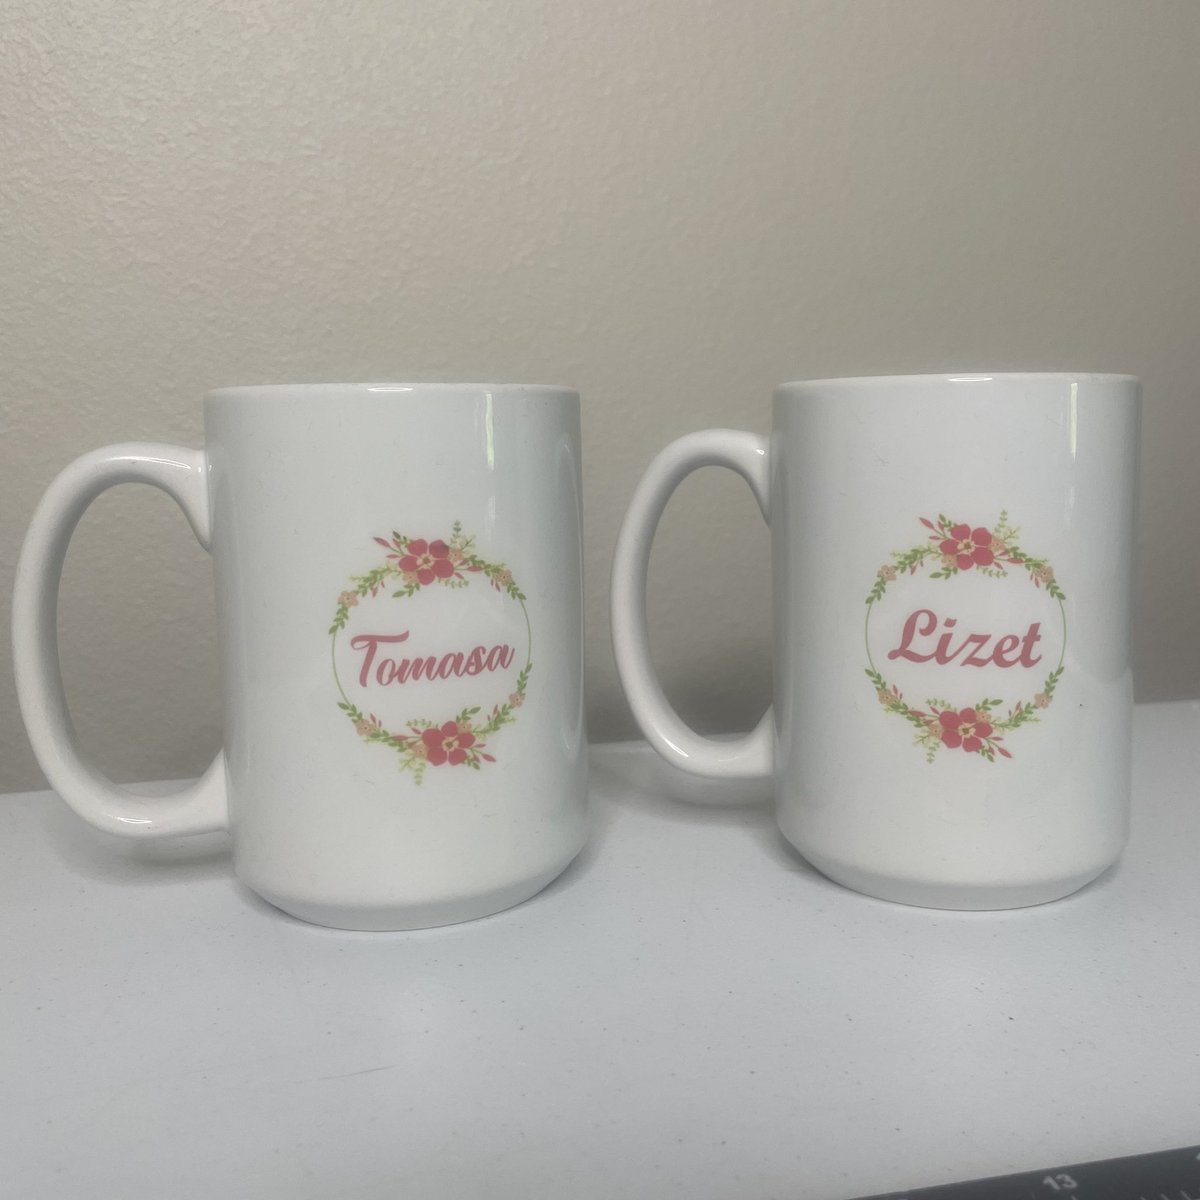 Feeling nostalgic looking back at the Mother’s Day coffee mugs from last year 🥲 
.
#jackoftrades #printshop #custommade #coffeemugs #mothersday #sublimation 
#personalizedgifts #customprinting #mothersdaygifts #sublimationprinting #custommugs